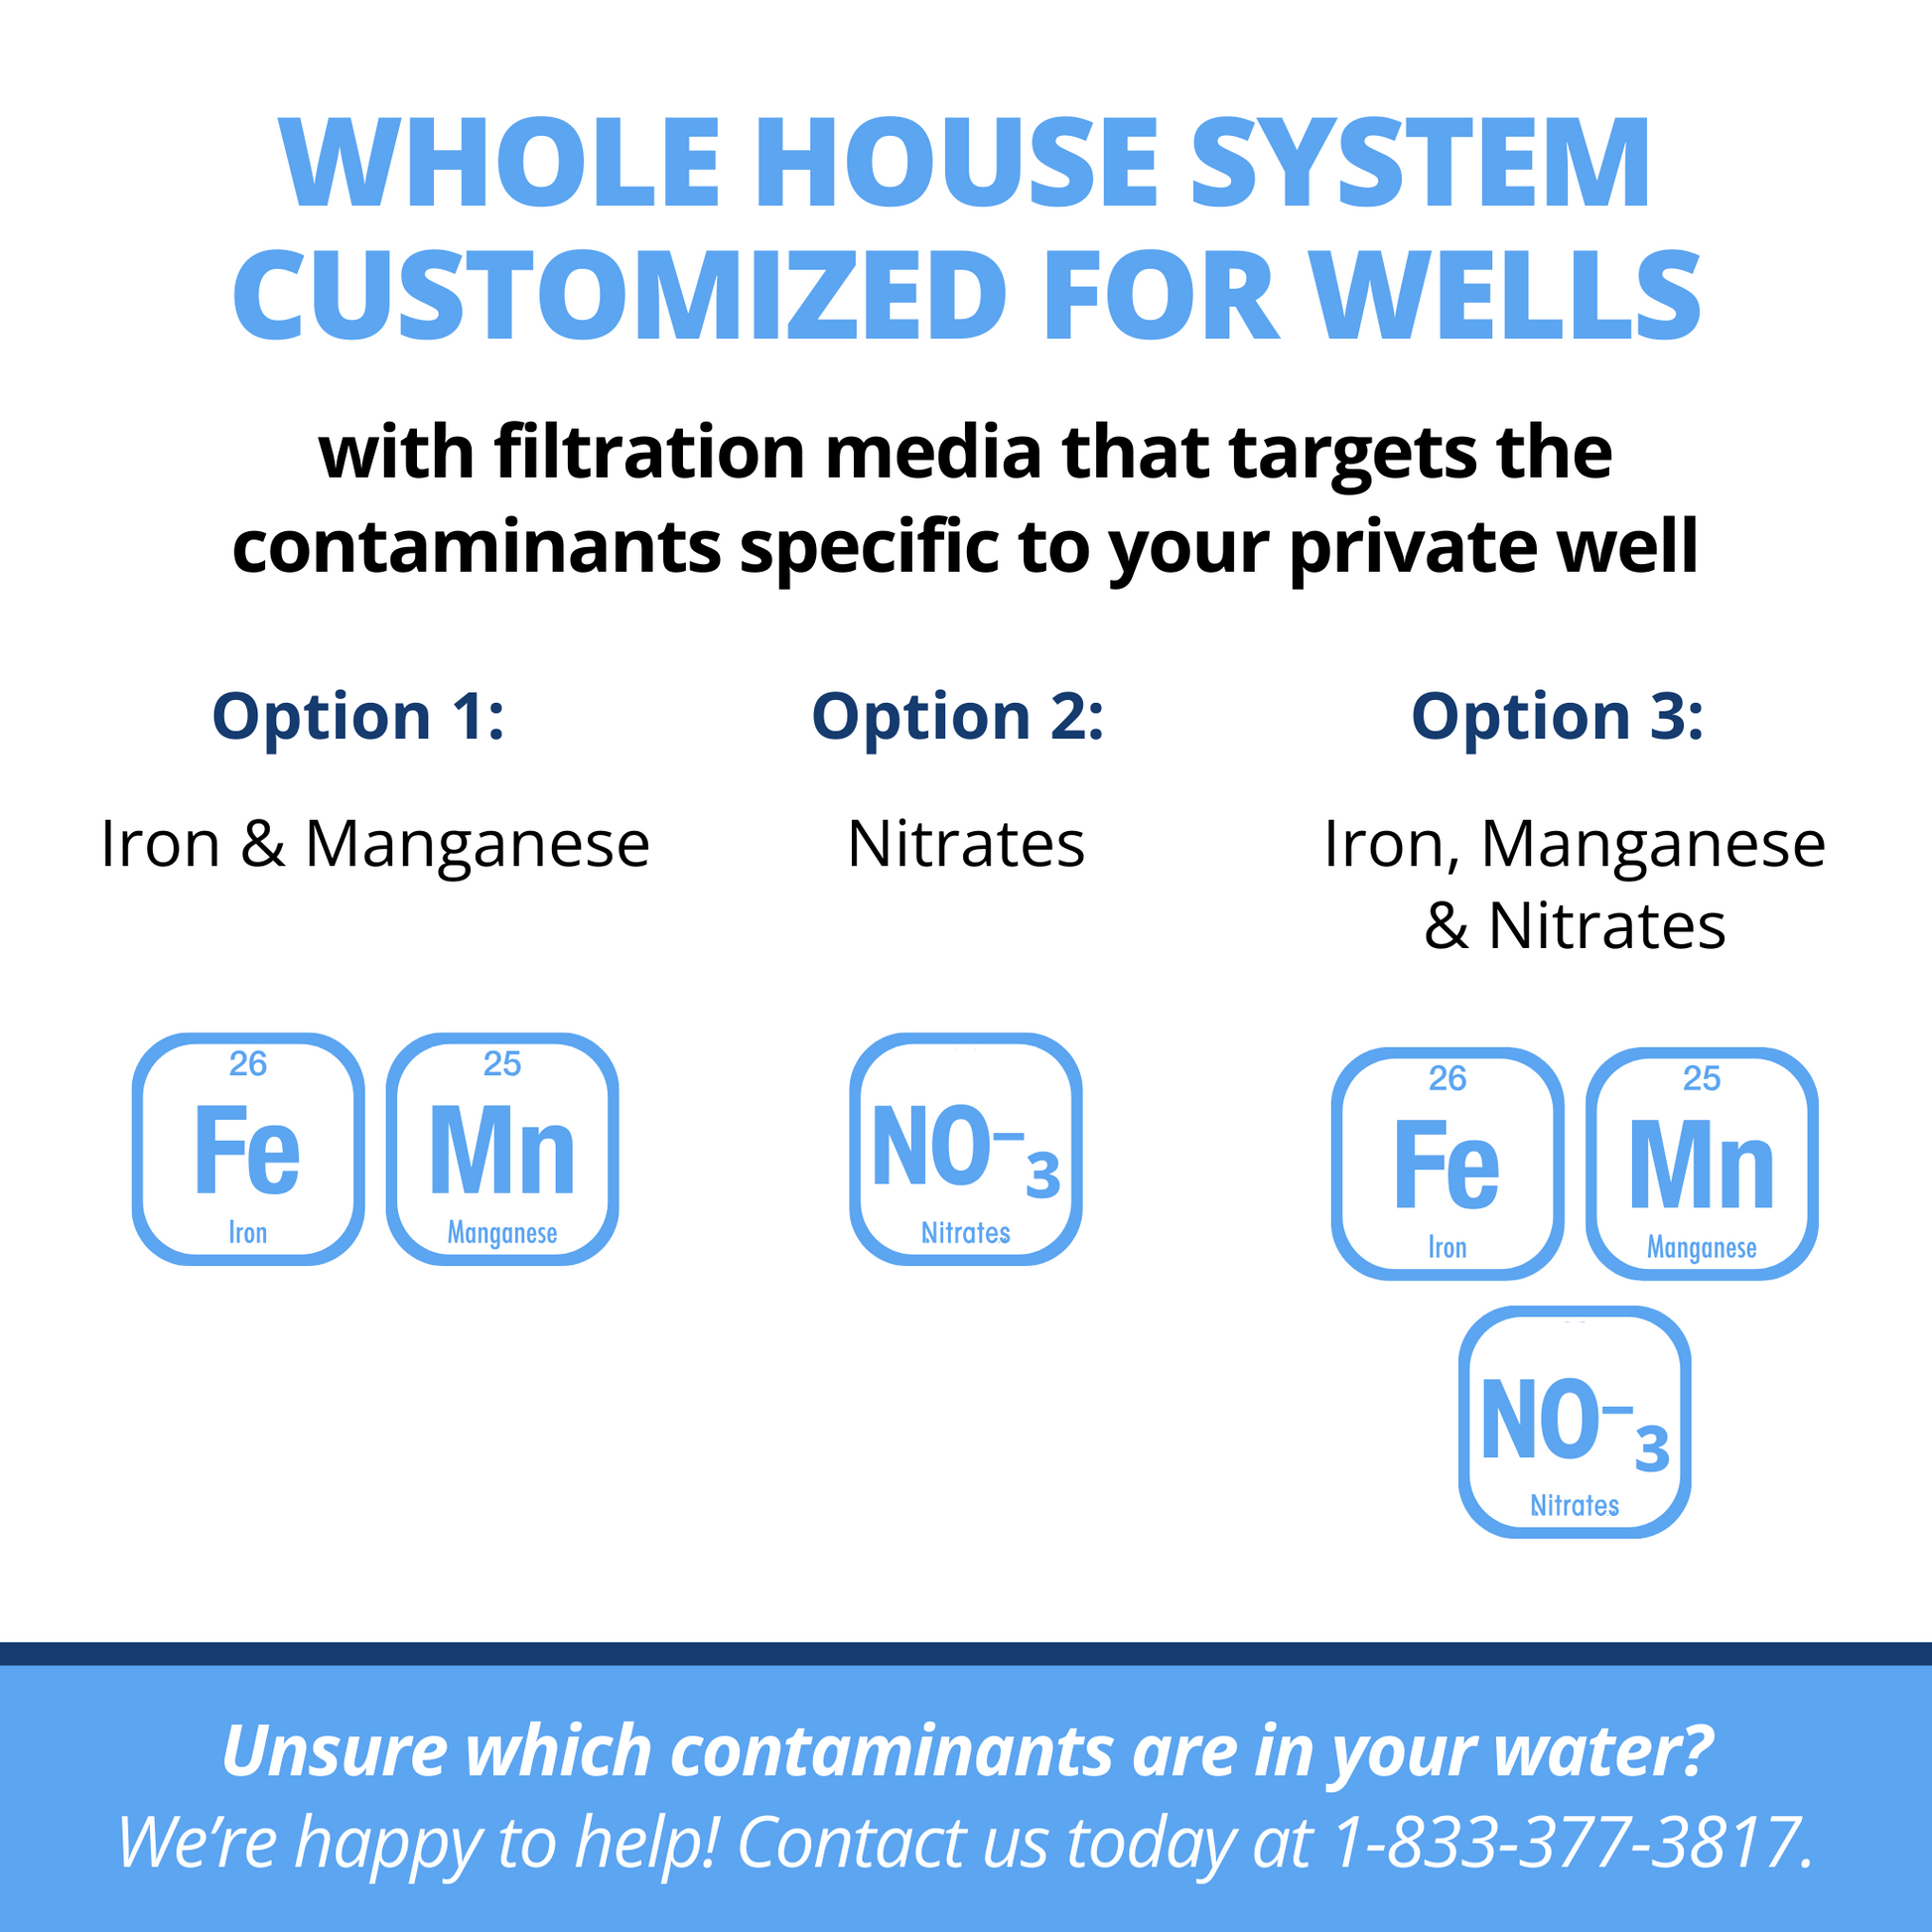 WELL WHOLE HOUSE filtration system with options for iron, manganese, and nitrate removal